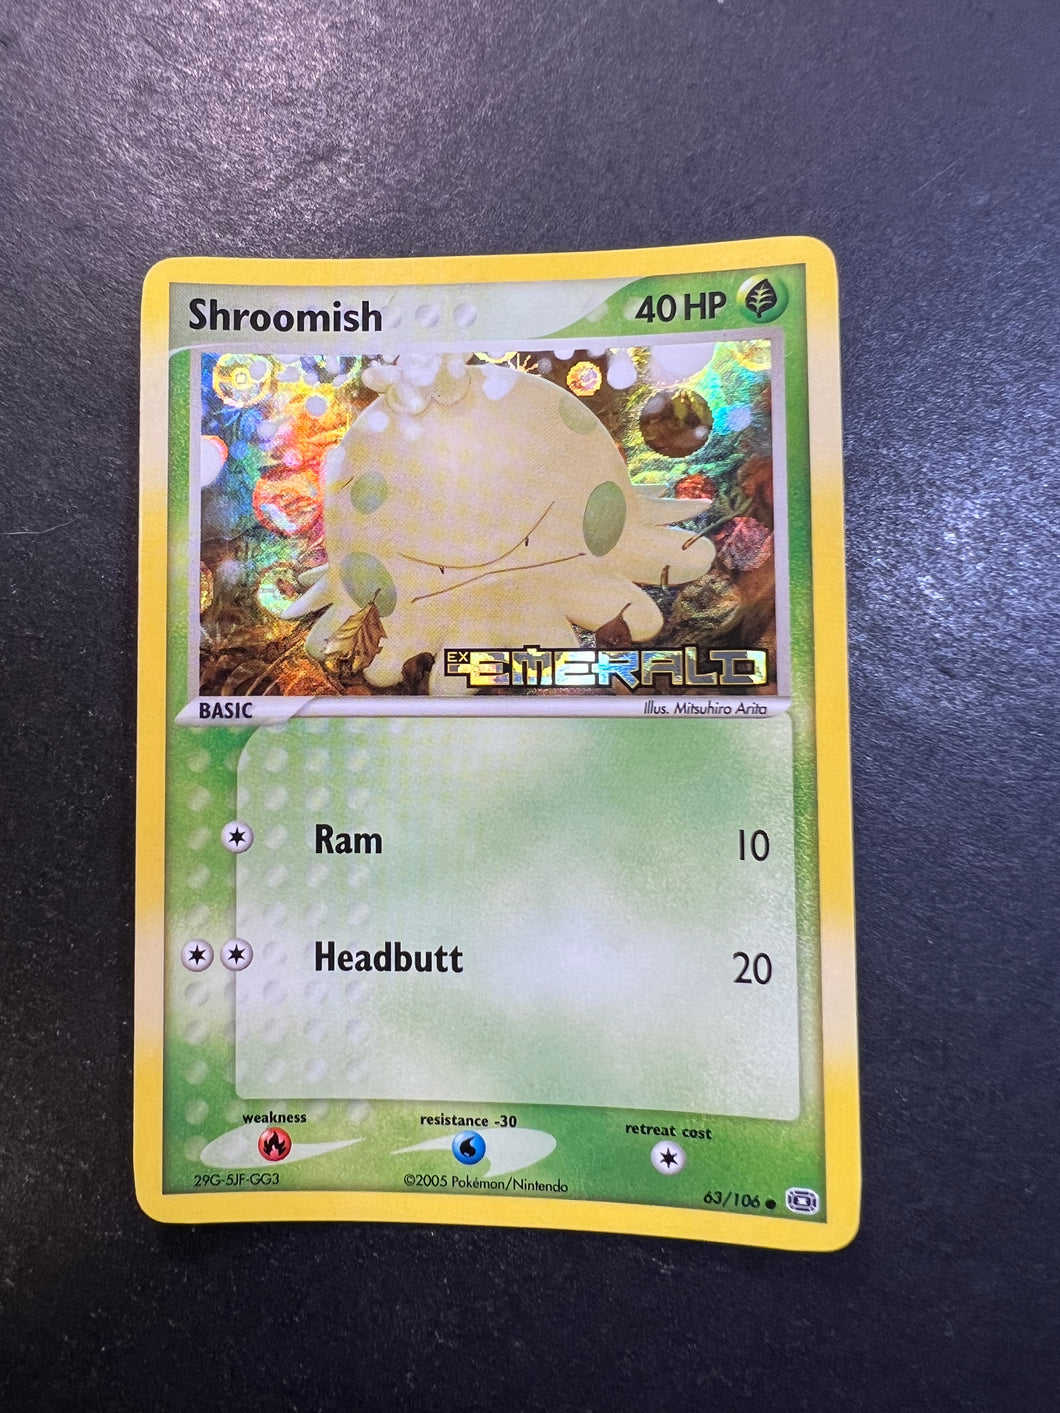 Shroomish - 63/106 “Stamped” Reverse Holo - EX Emerald